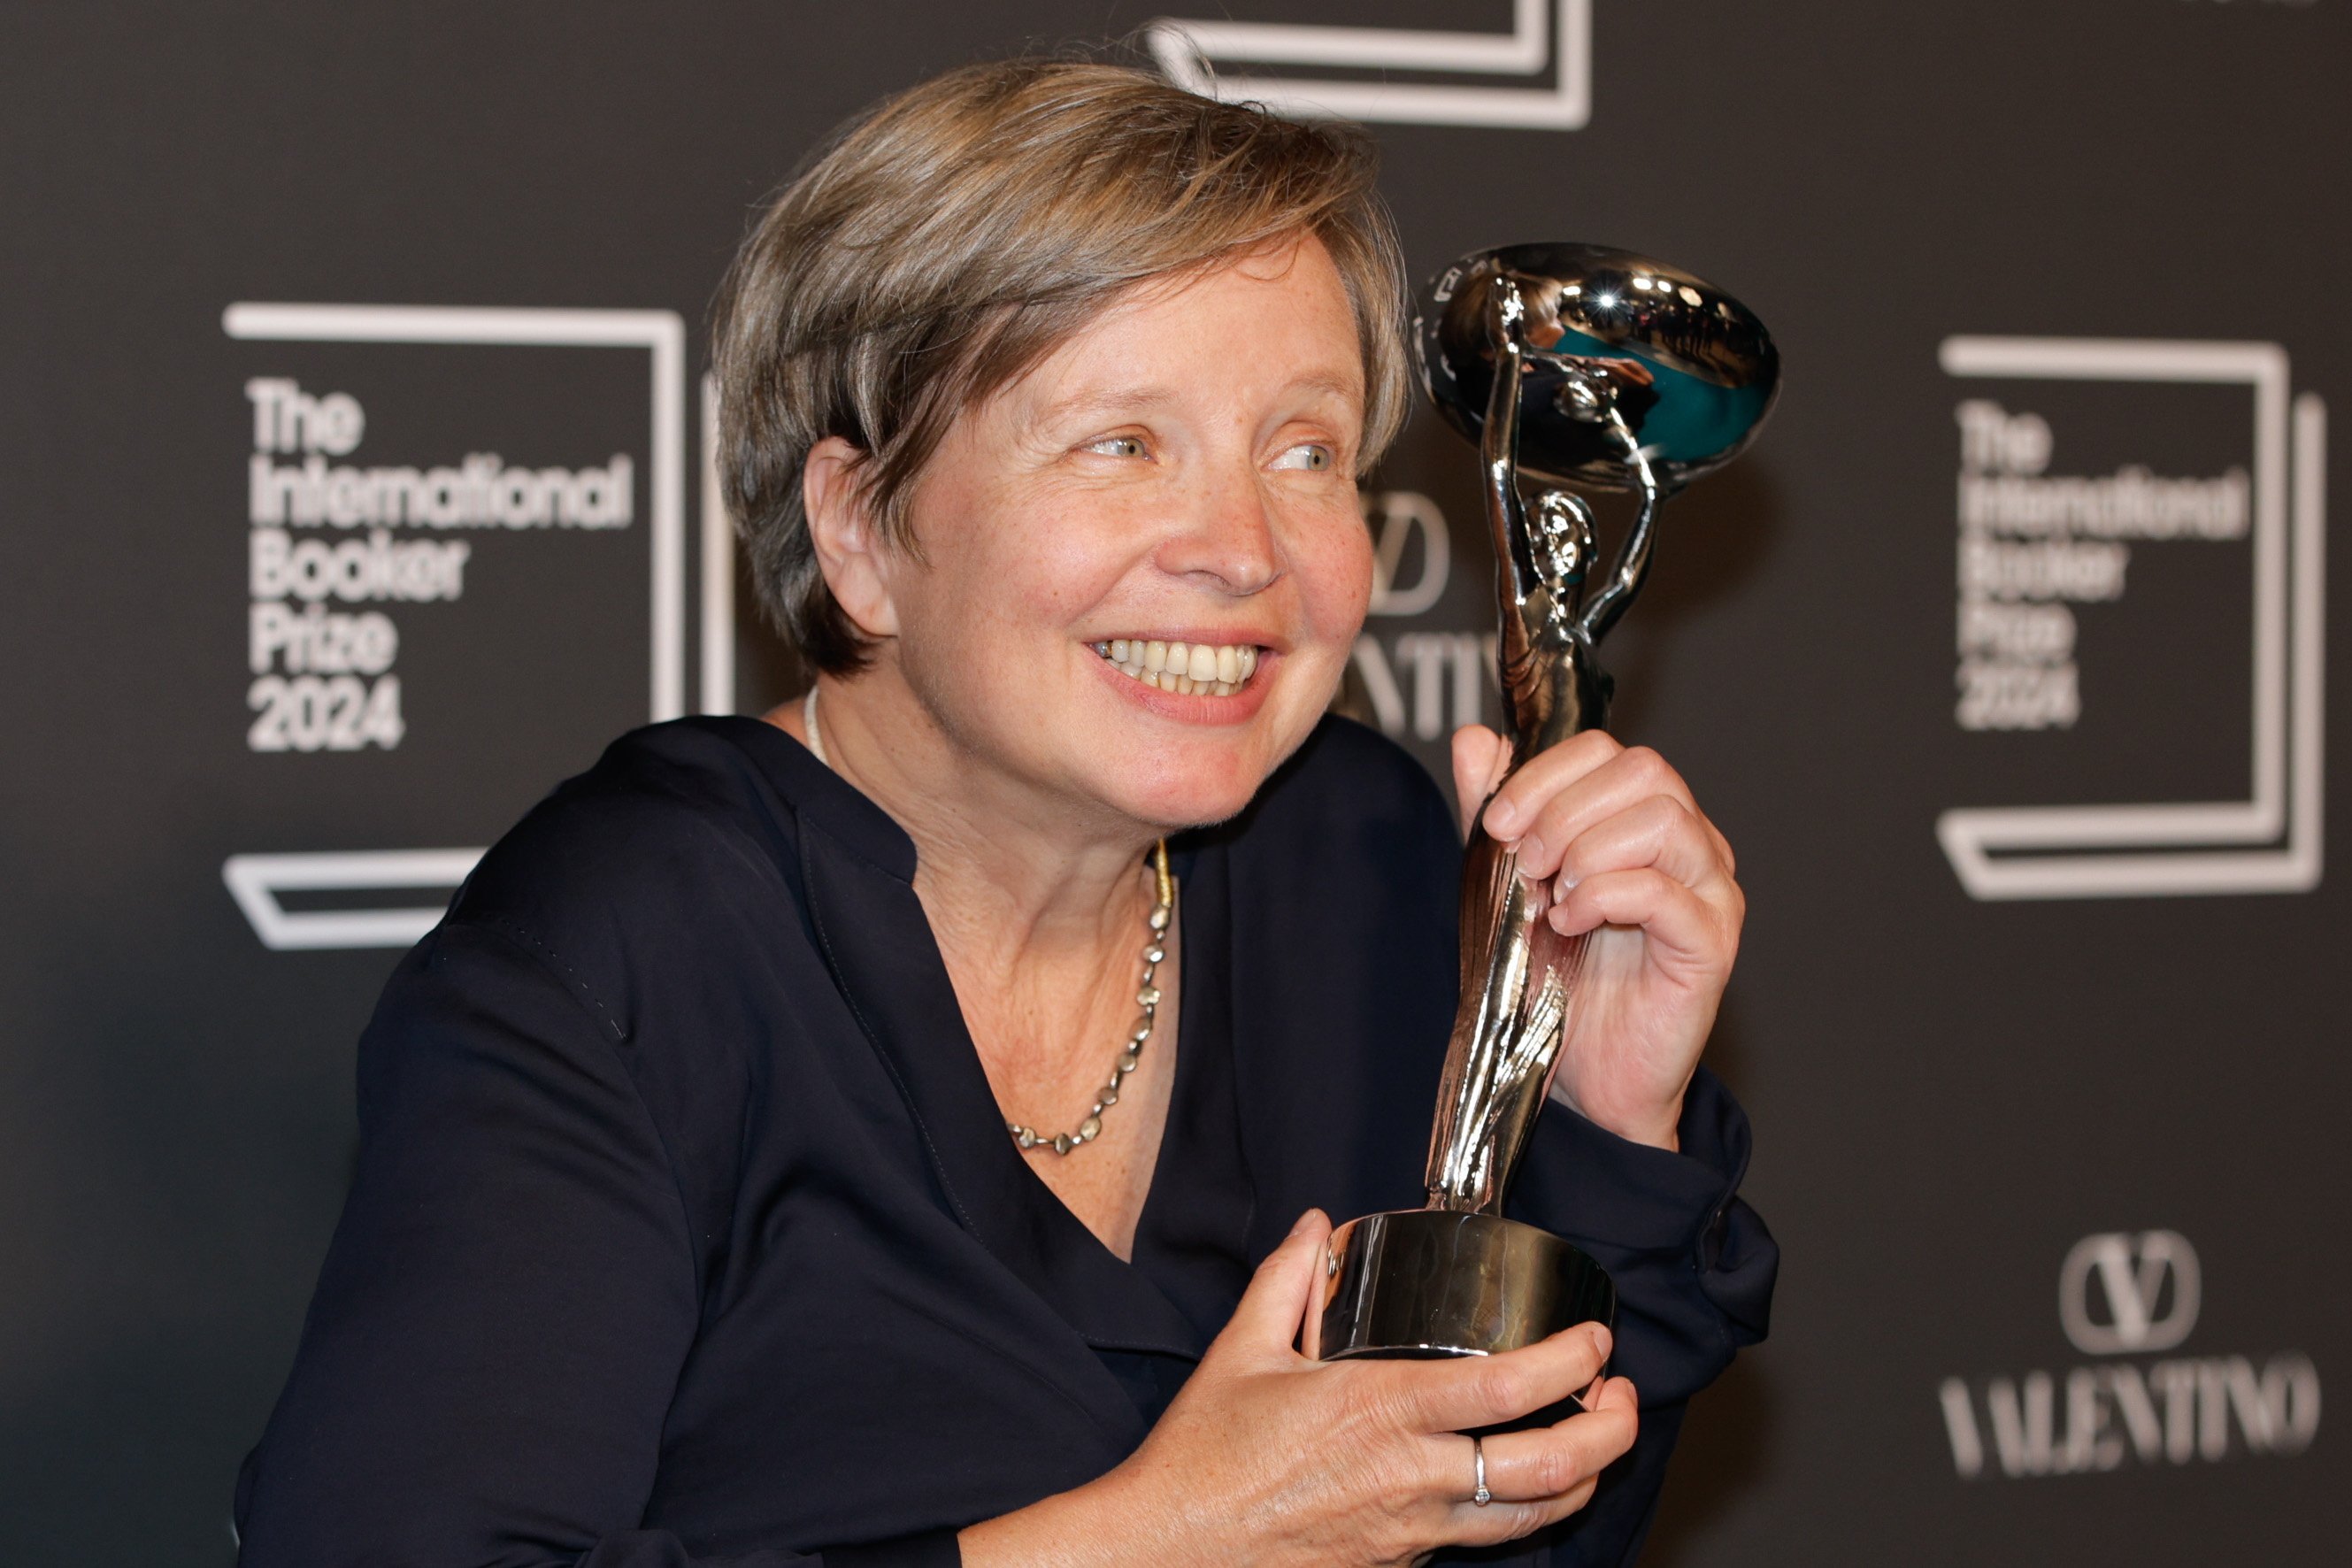 Jenny Erpenbeck, author of “Kairos”, poses for photographers after winning the 2024 International Booker Prize in London on Tuesday. Photo: EPA-EFE